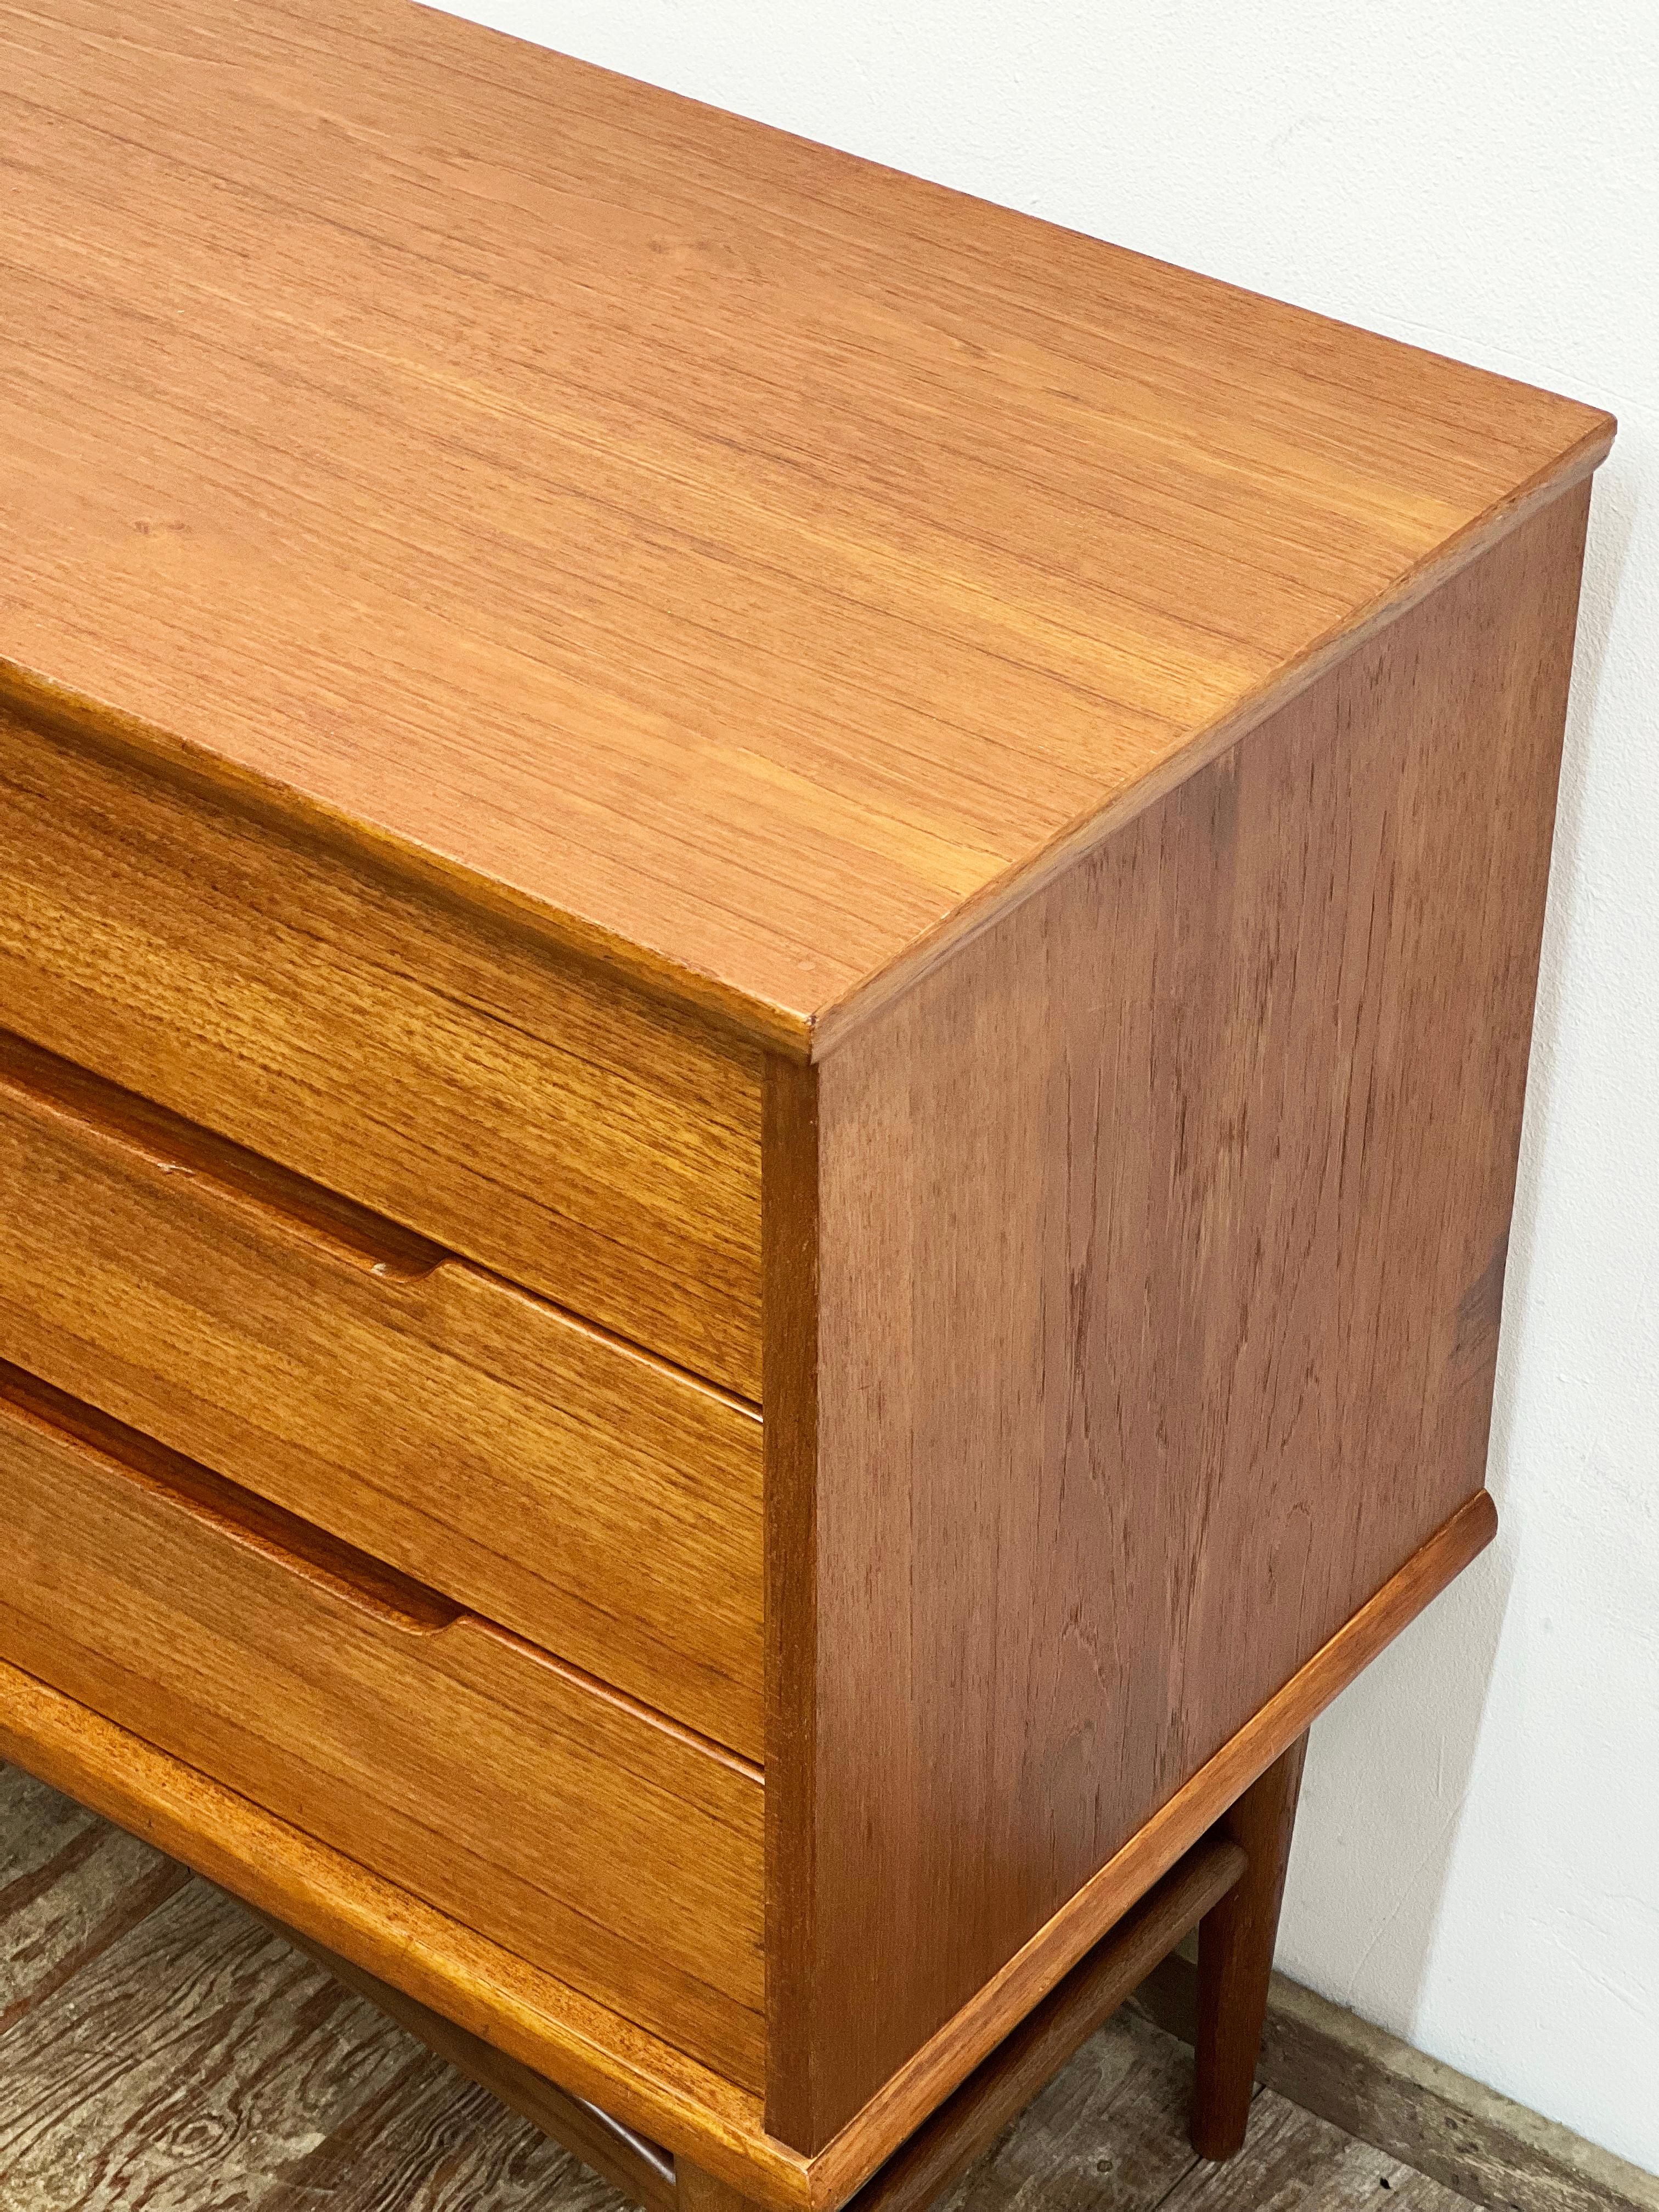 Small Mid-Century Modern Fredericia Sideboard in Teak, Germany, 1950s For Sale 9